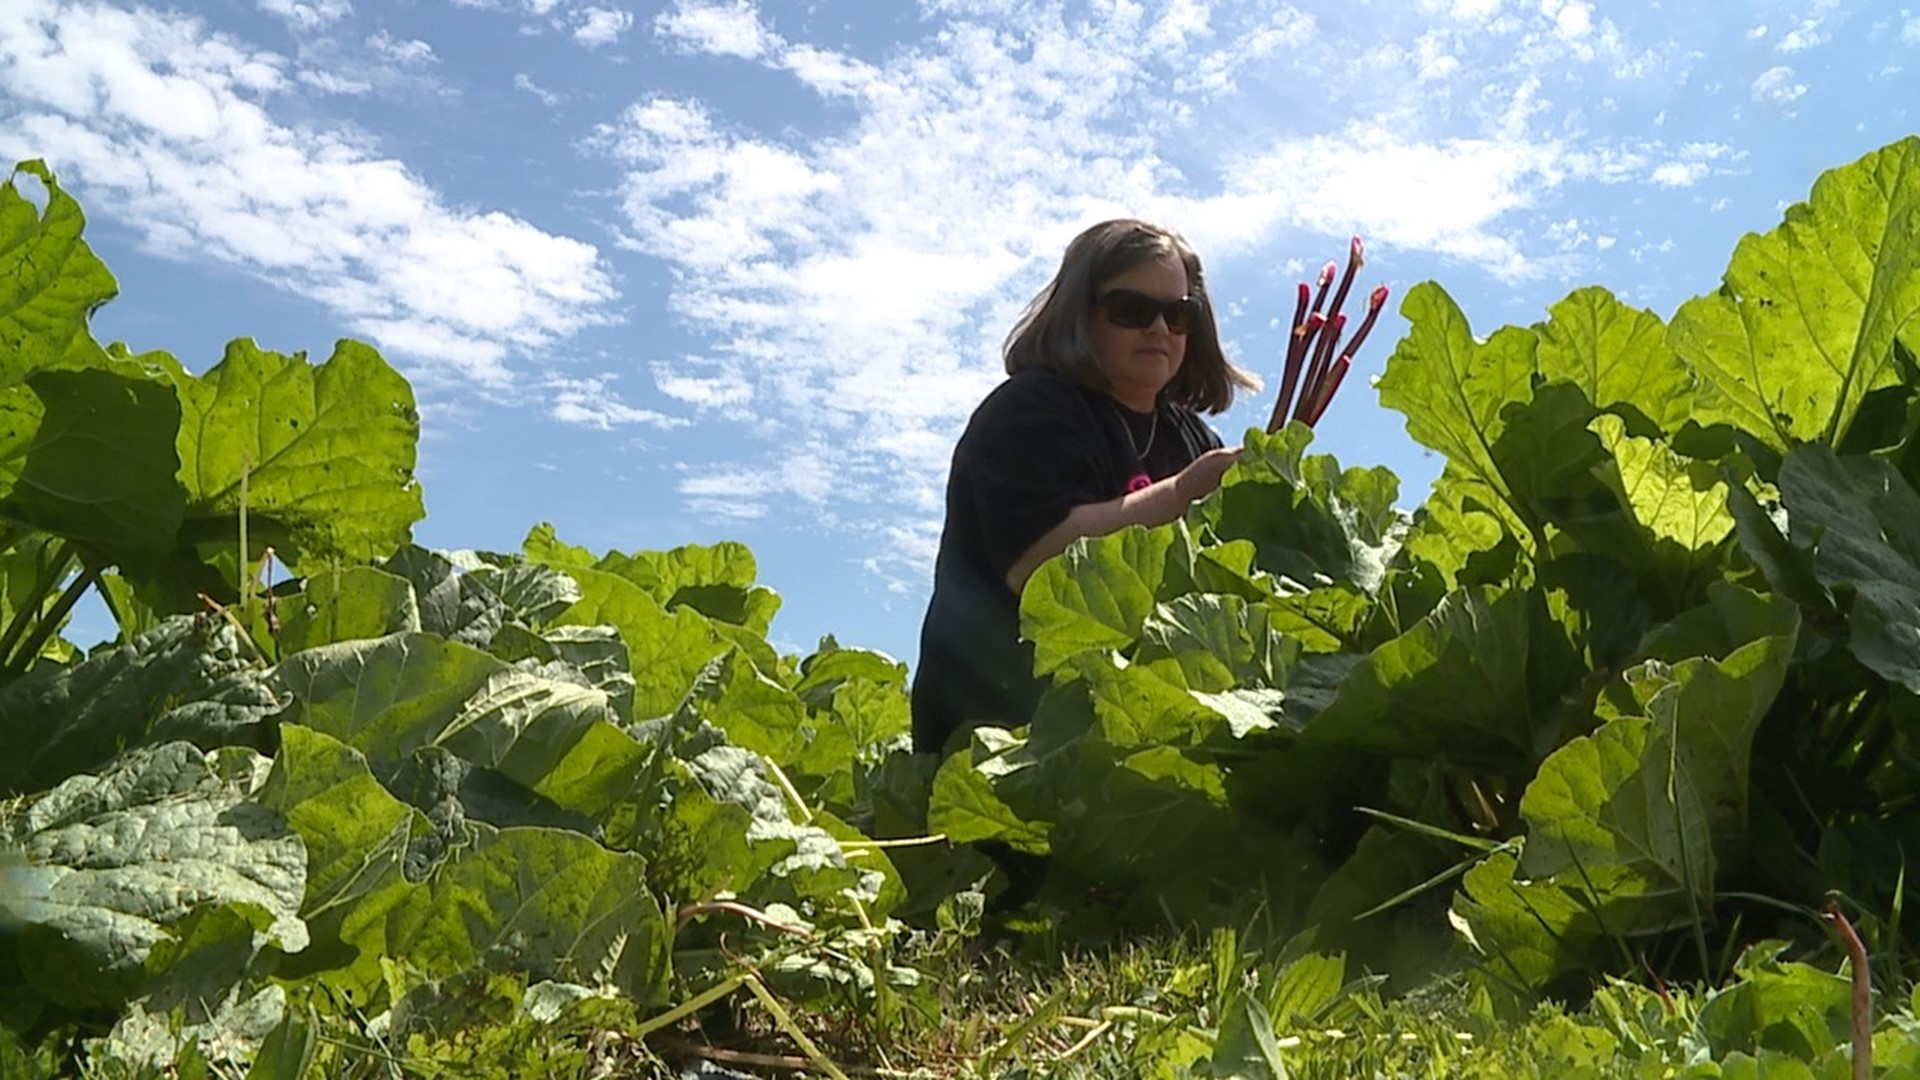 In order to make the thousands of pies, crisps and other rhubarb treats at Rhubarb Fest, first all the plants need to be picked. Many, many times.